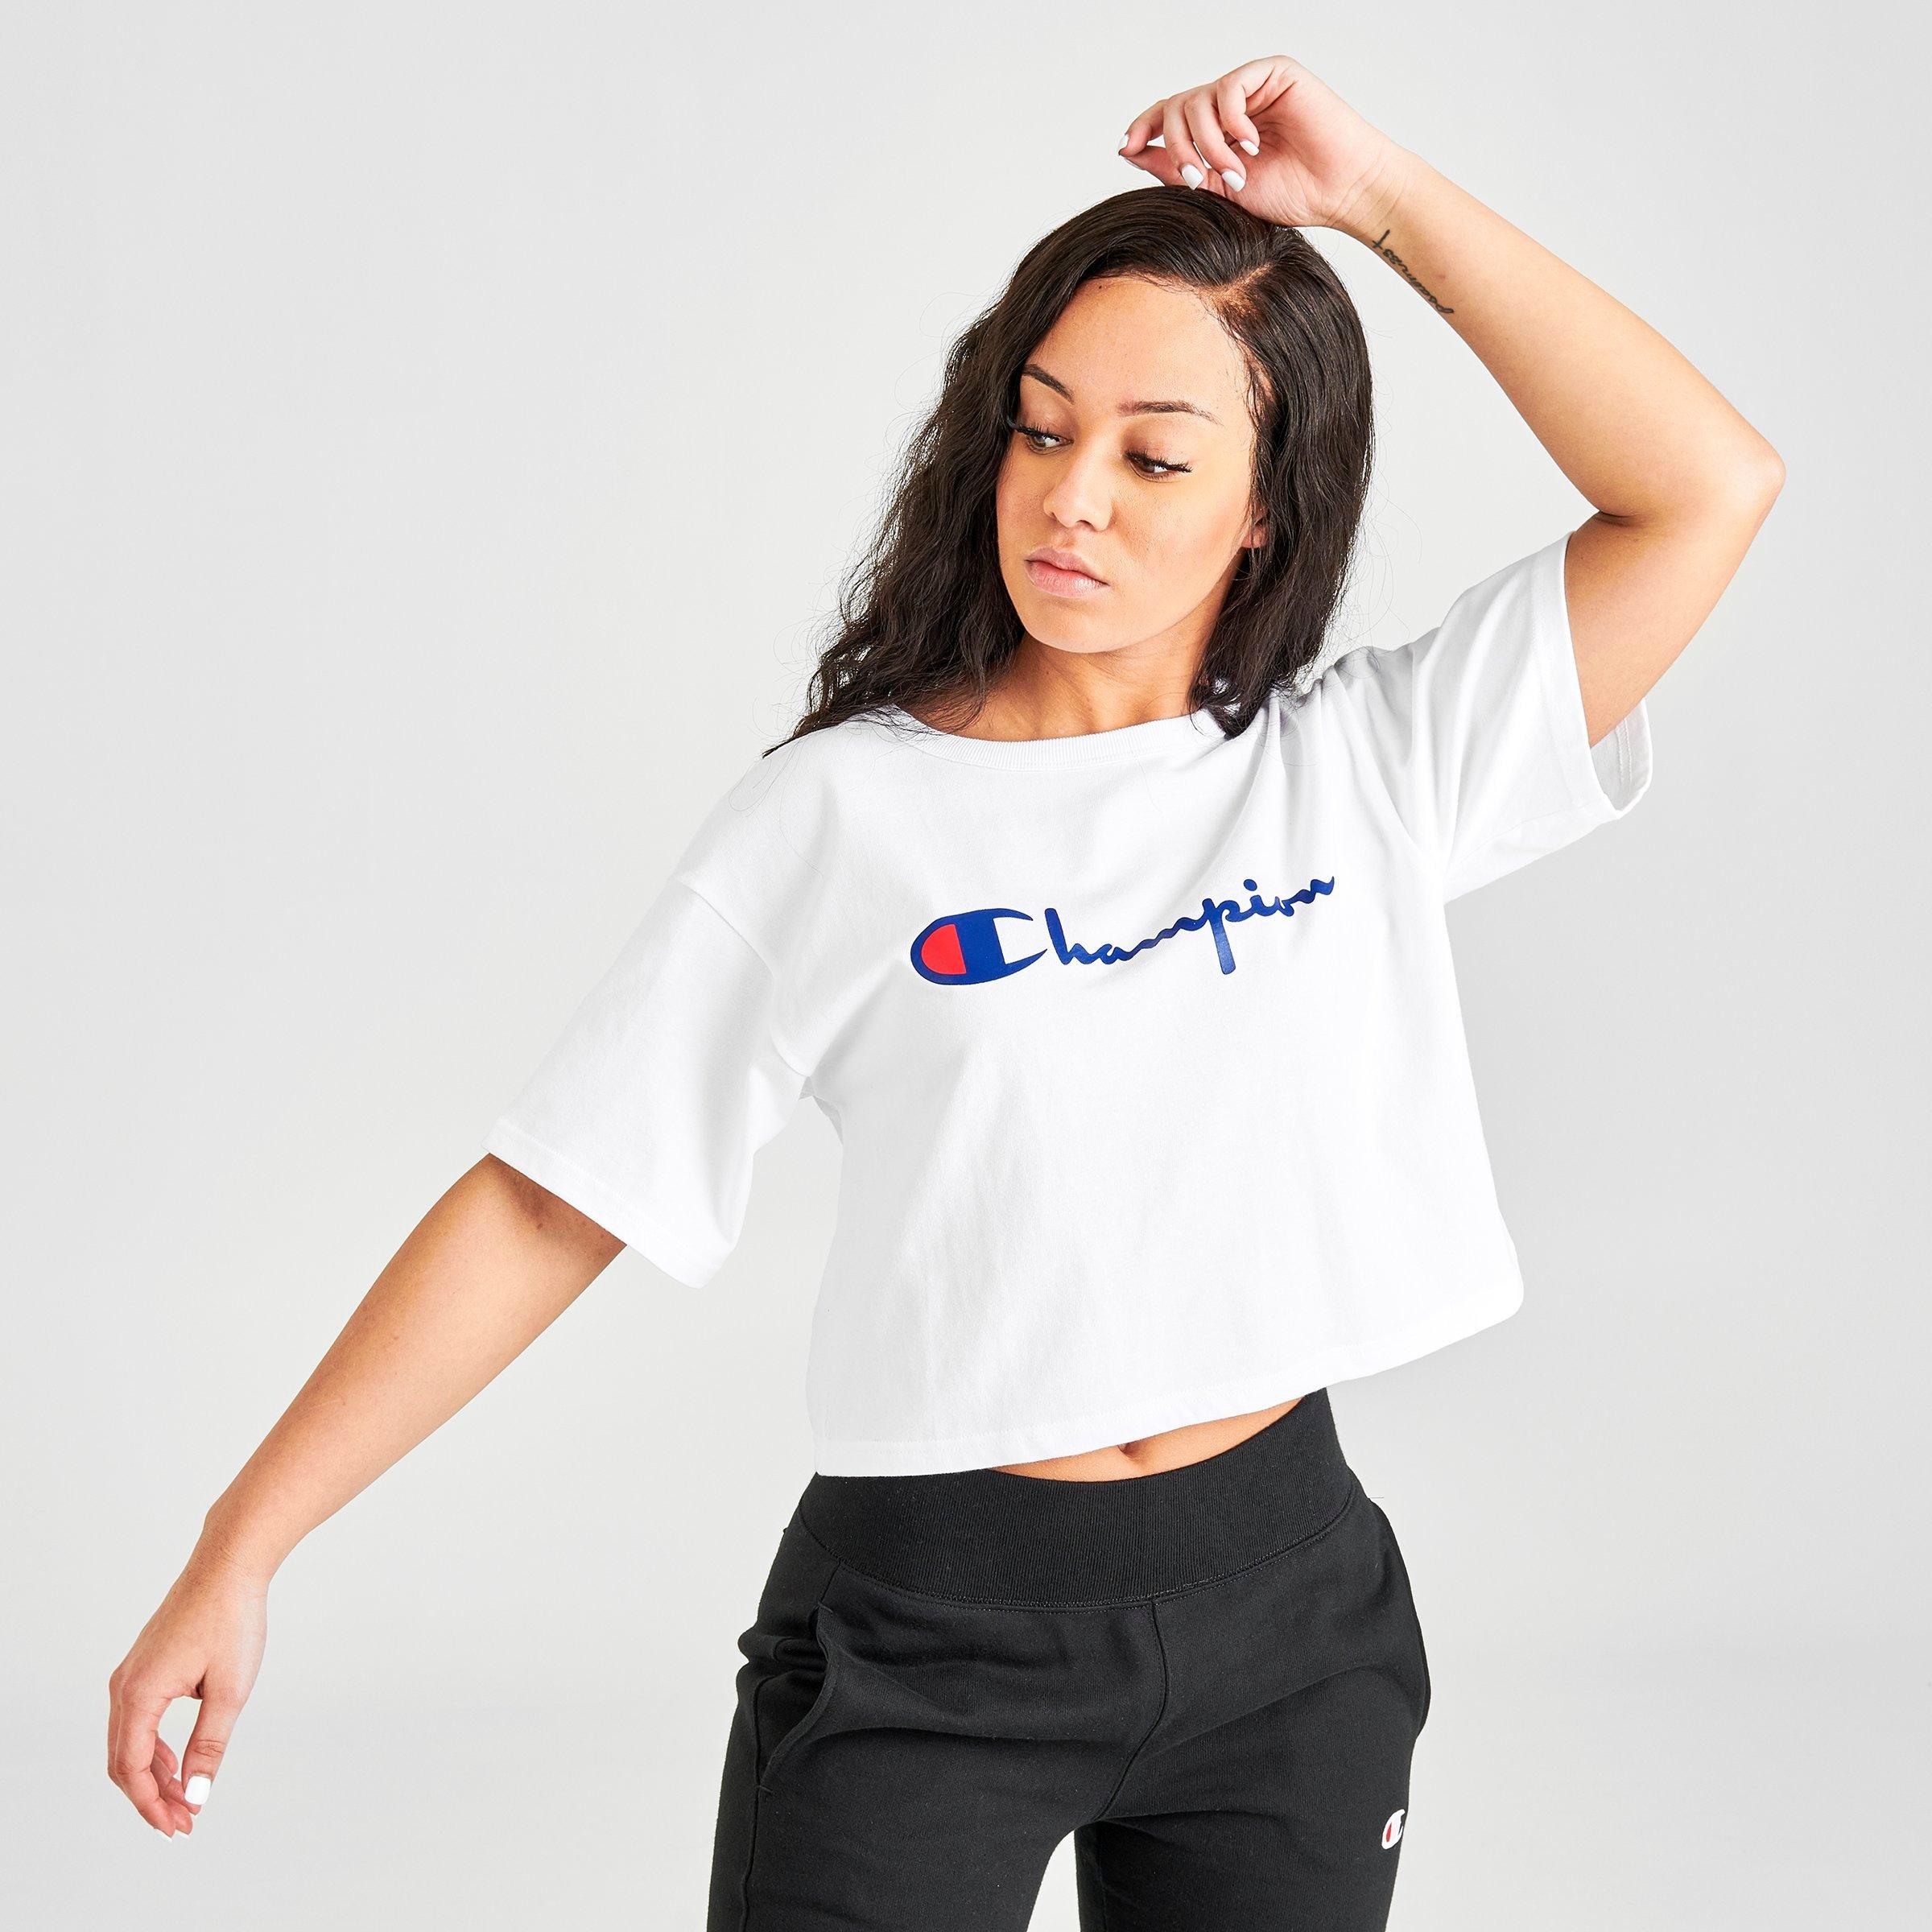 champion clothing for women